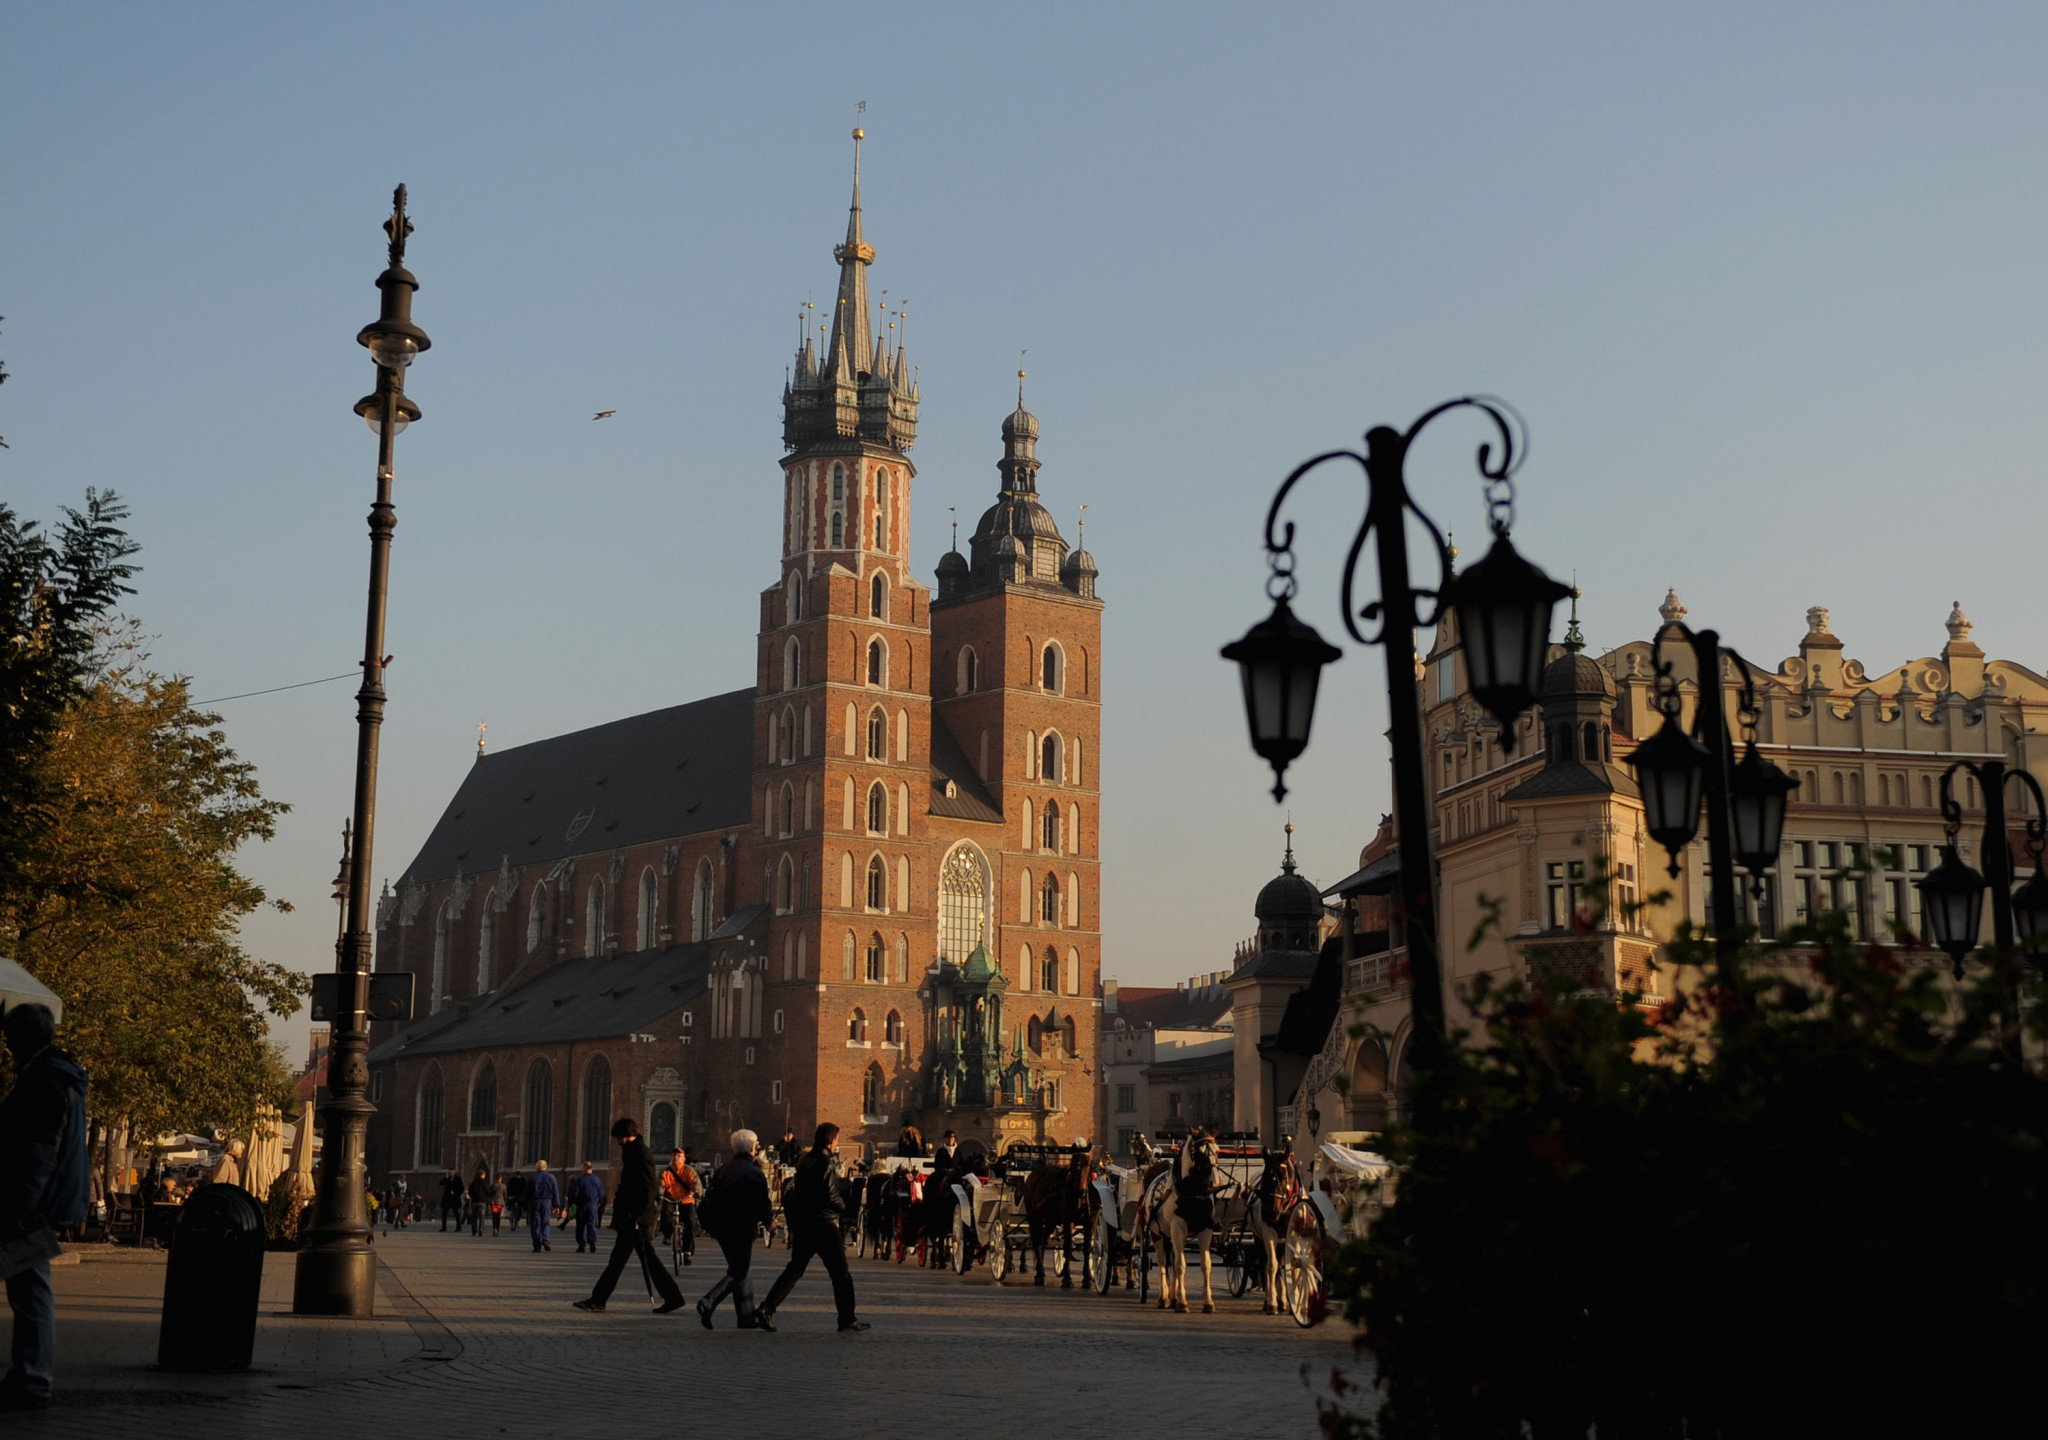 Kraków-Małopolska 2023 European Games is scheduled to be held form June 21 to July 2 ©Getty Images